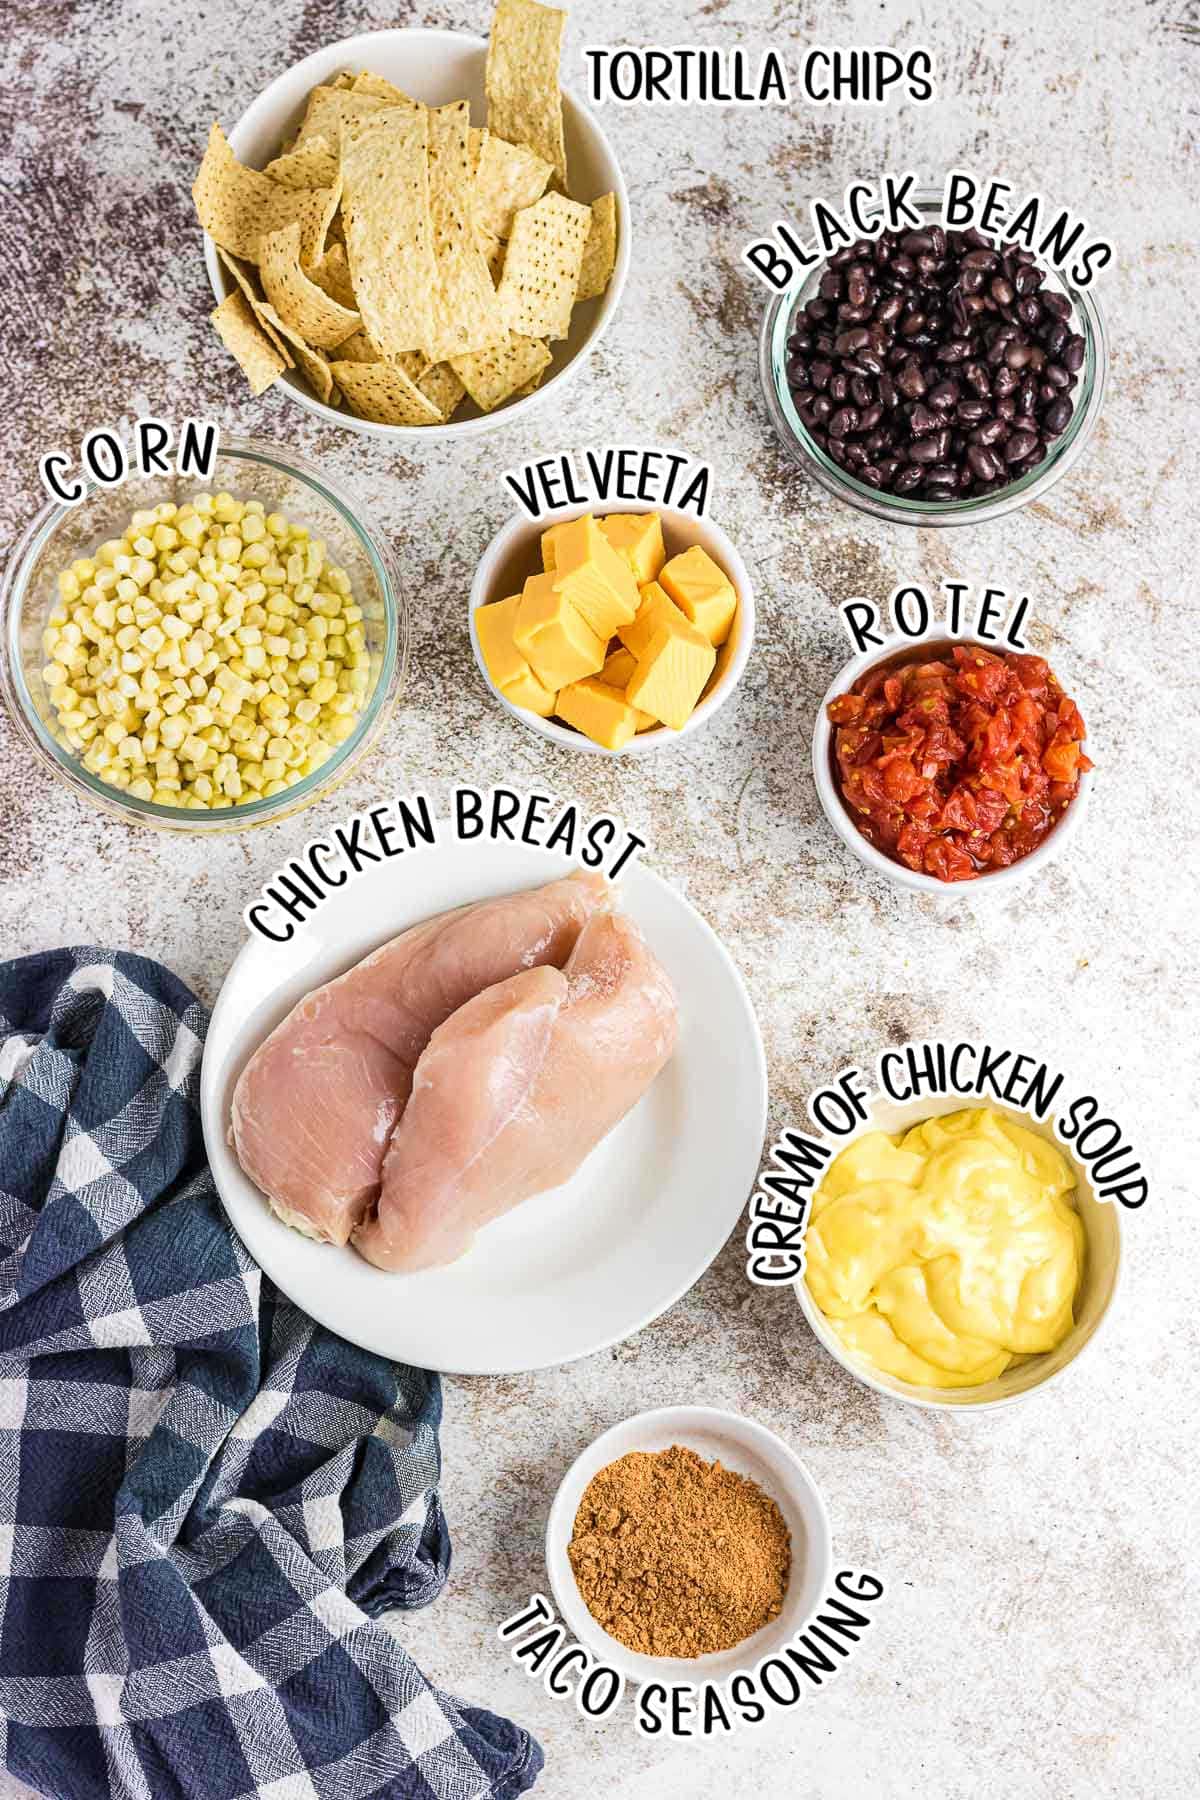 An overhead photo of the recipe ingredients on various plates and bowls.